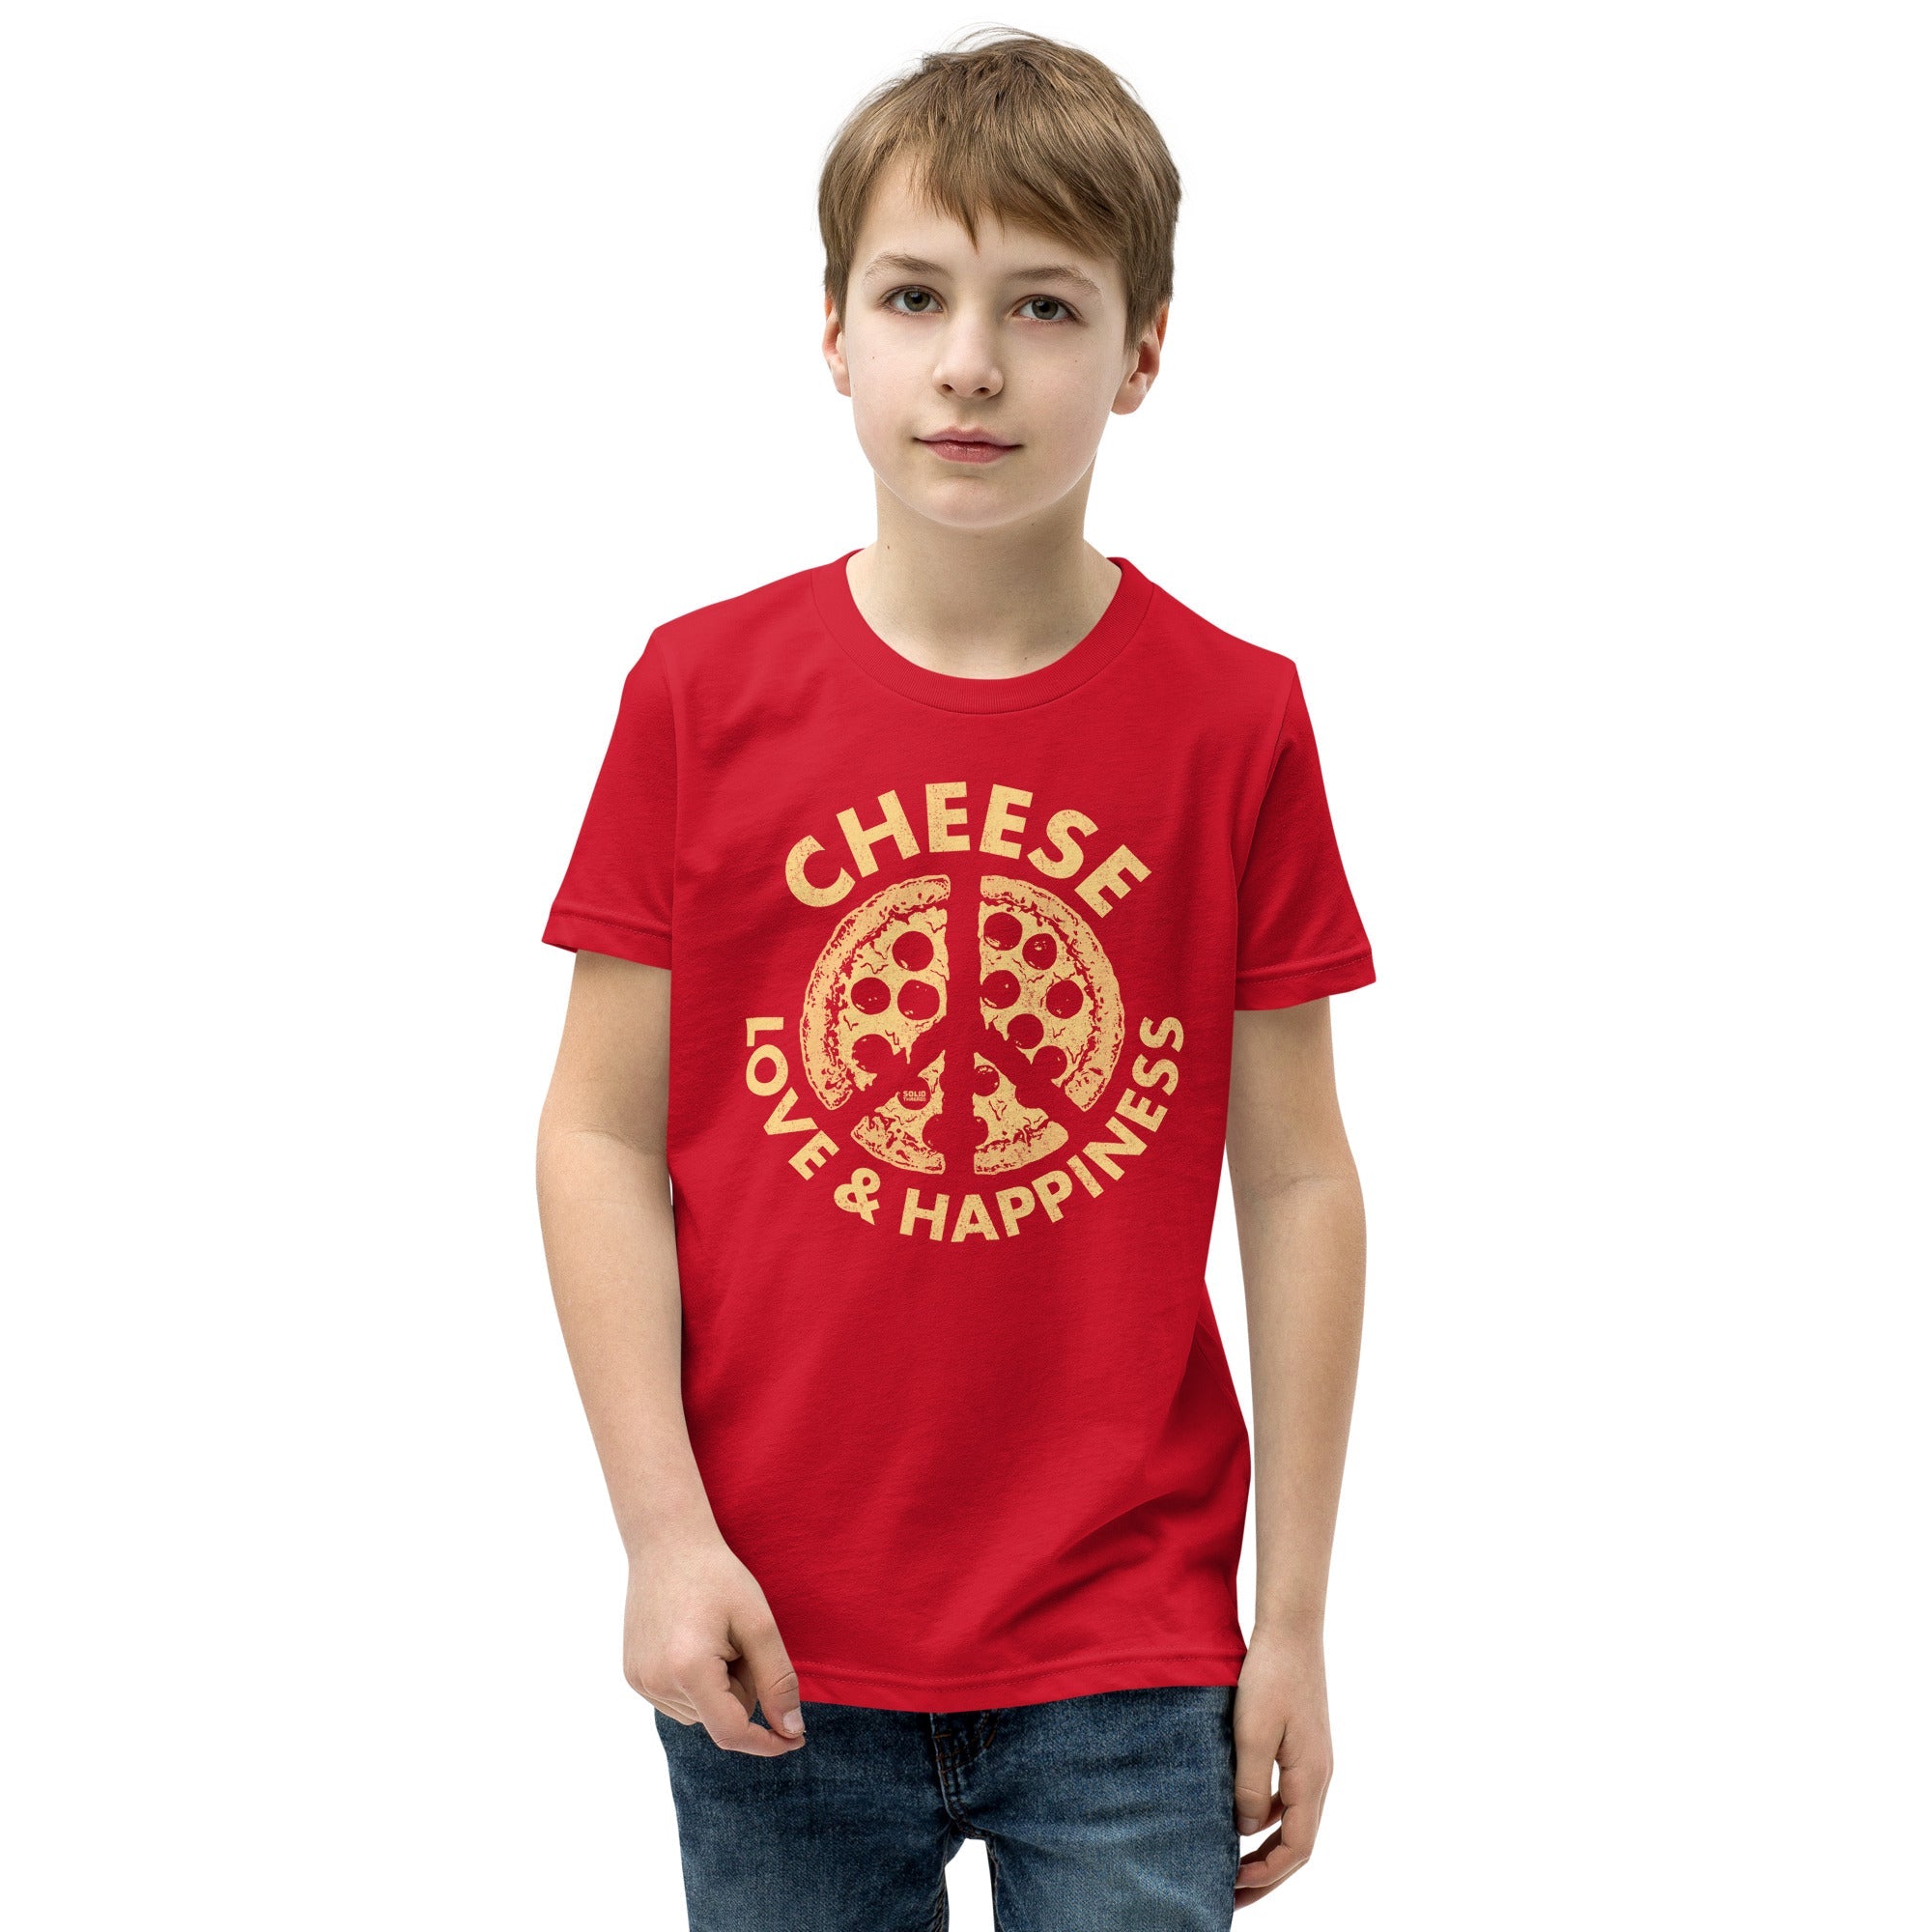 Youth Cheese Love Happiness Funny Extra Soft T-Shirt | Retro Pizza Kids Tee Boy Model | Solid Threads